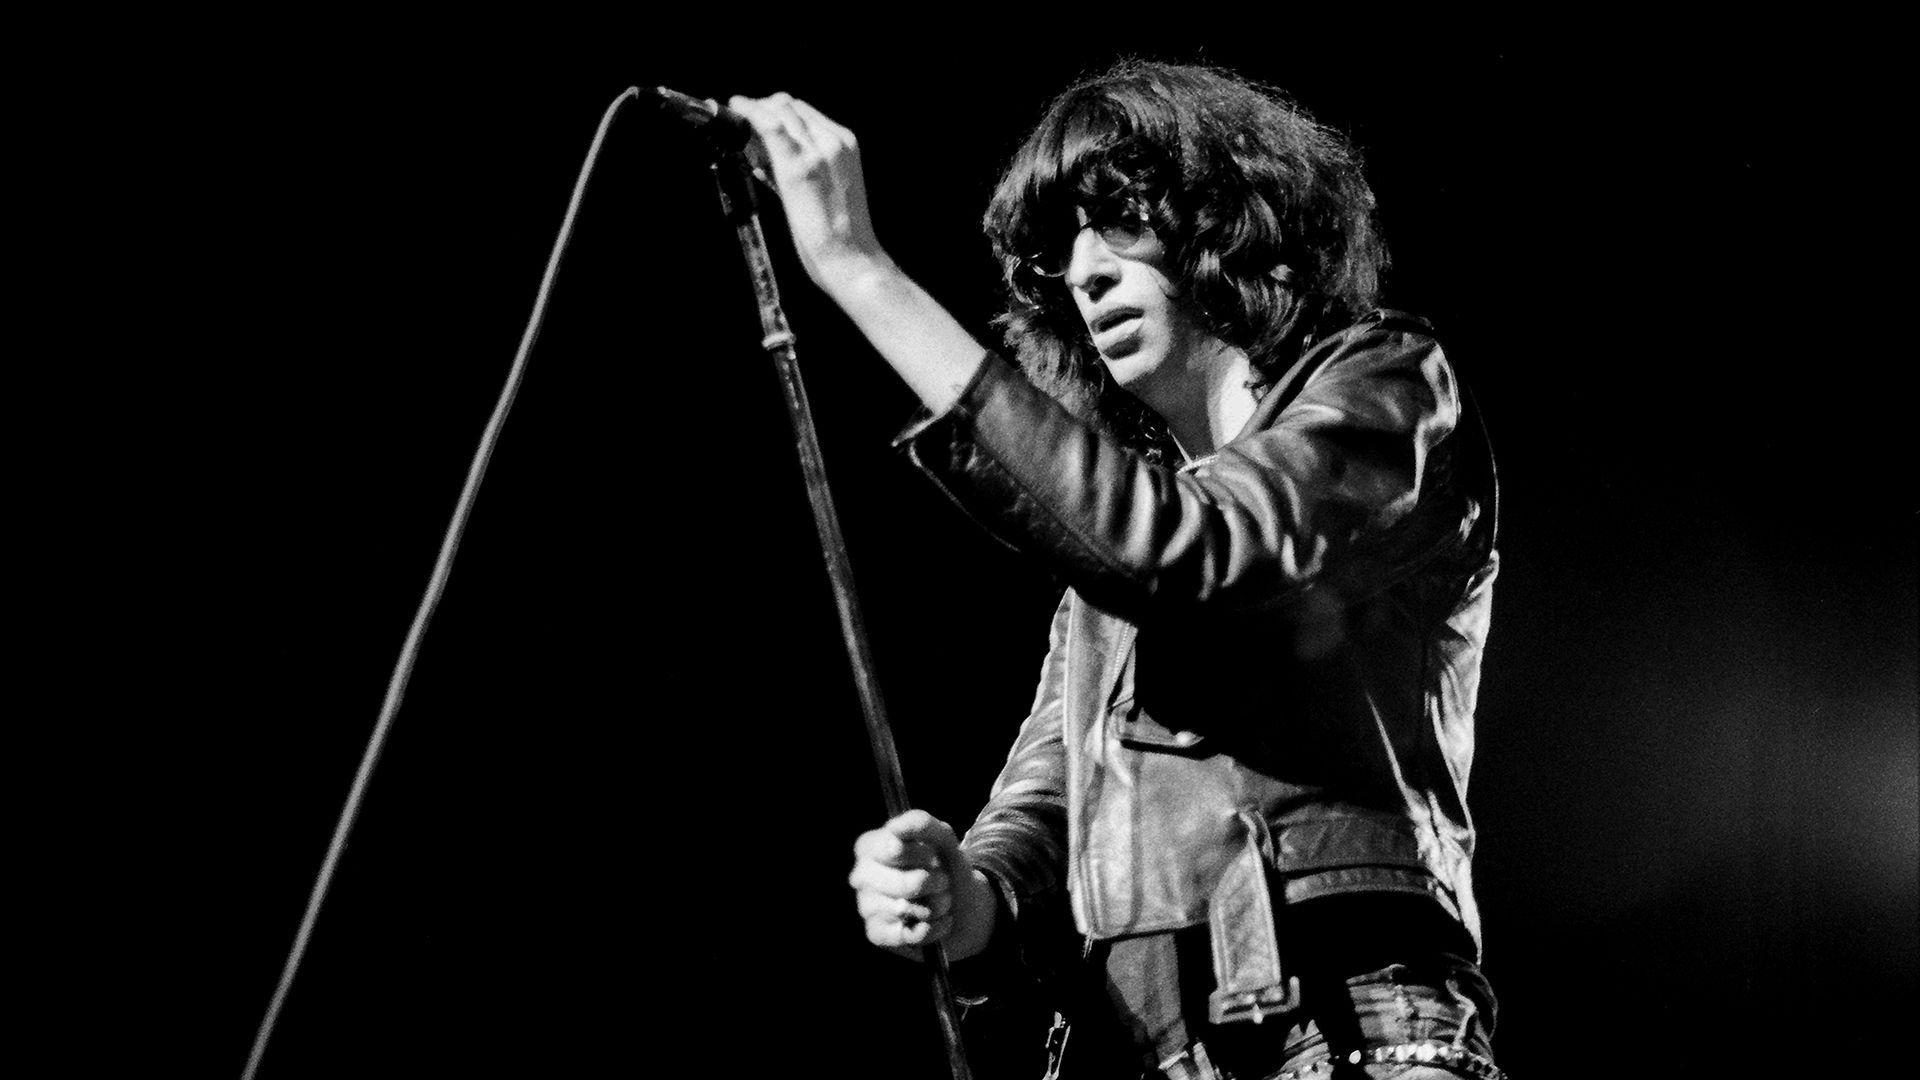 Joey Ramone: This is a person with lymphoma